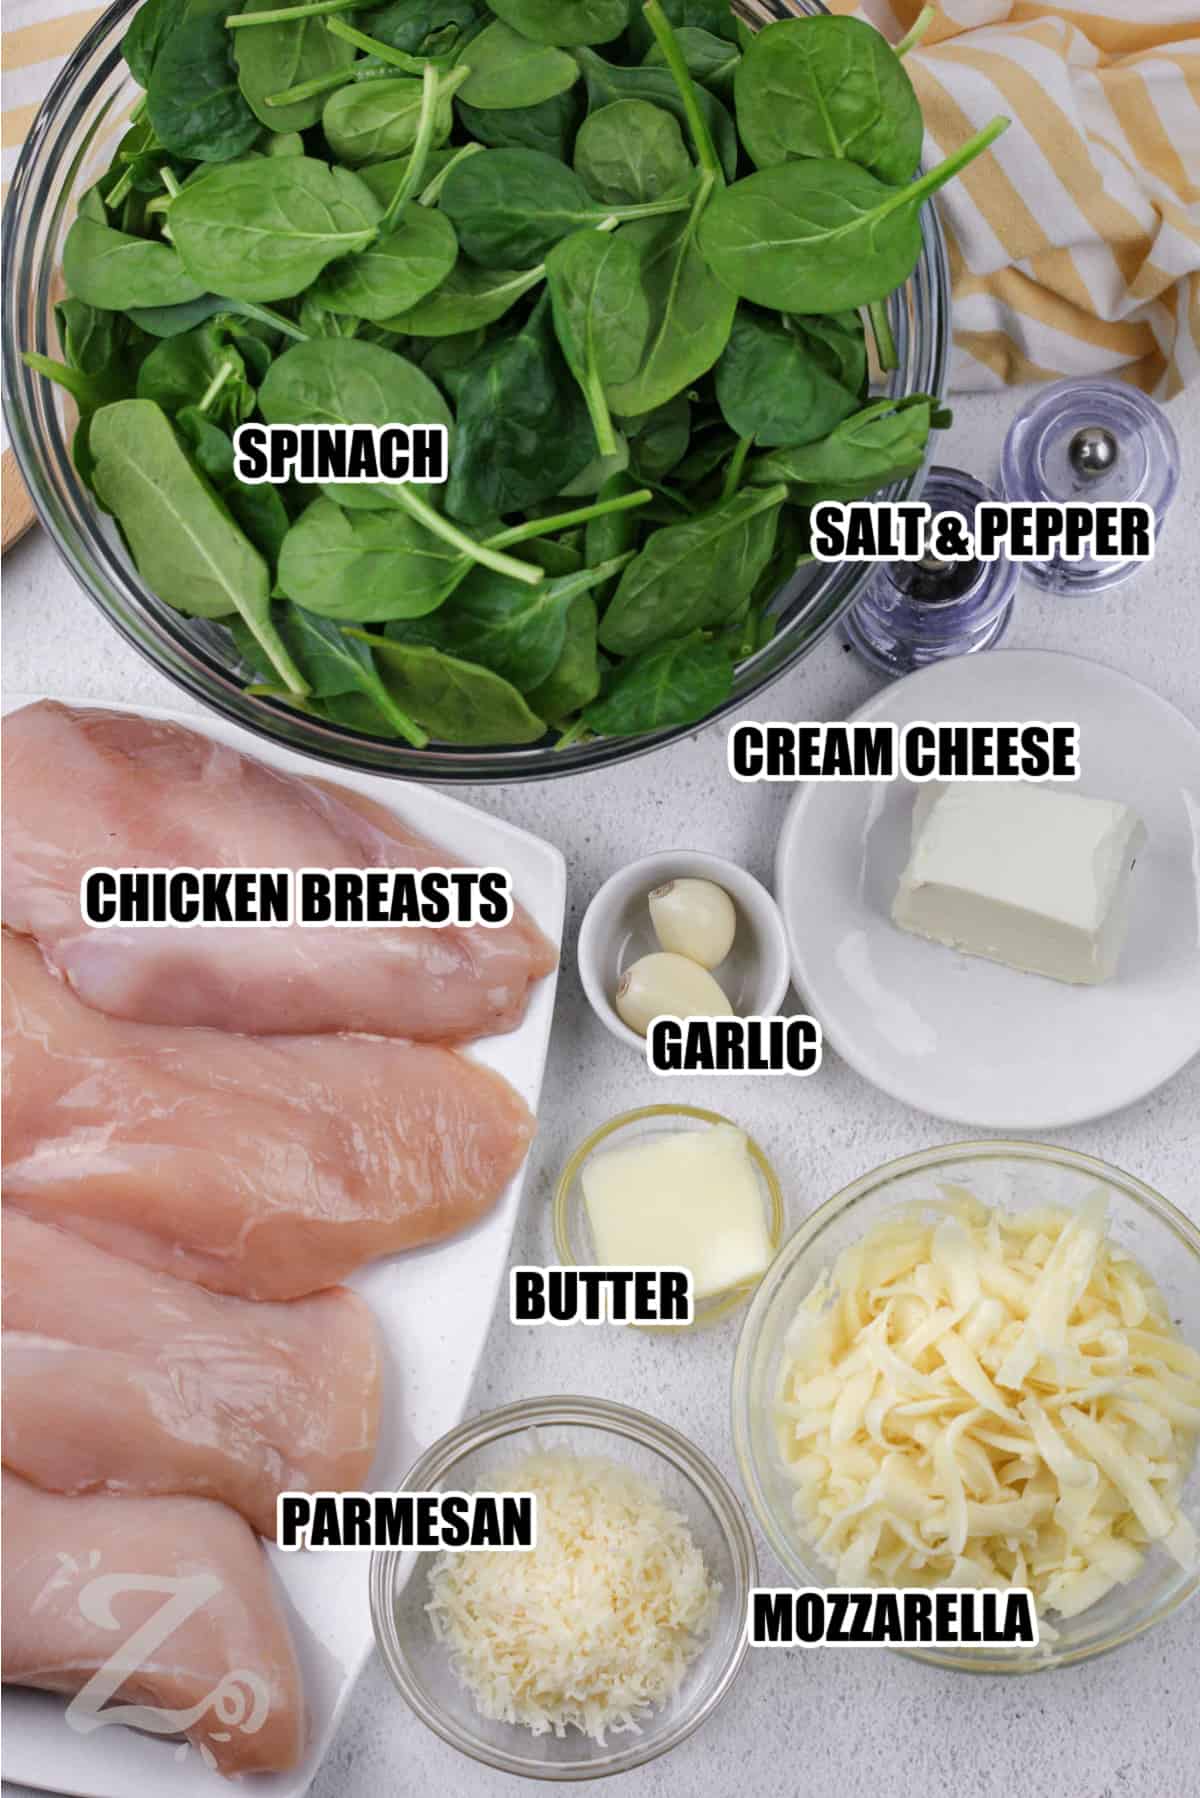 ingredients to spinach stuffed chicken breasts labeled: spinach, salt & pepper, cream cheese, garlic, butter, parmesan, mozzarella, and chicken breasts